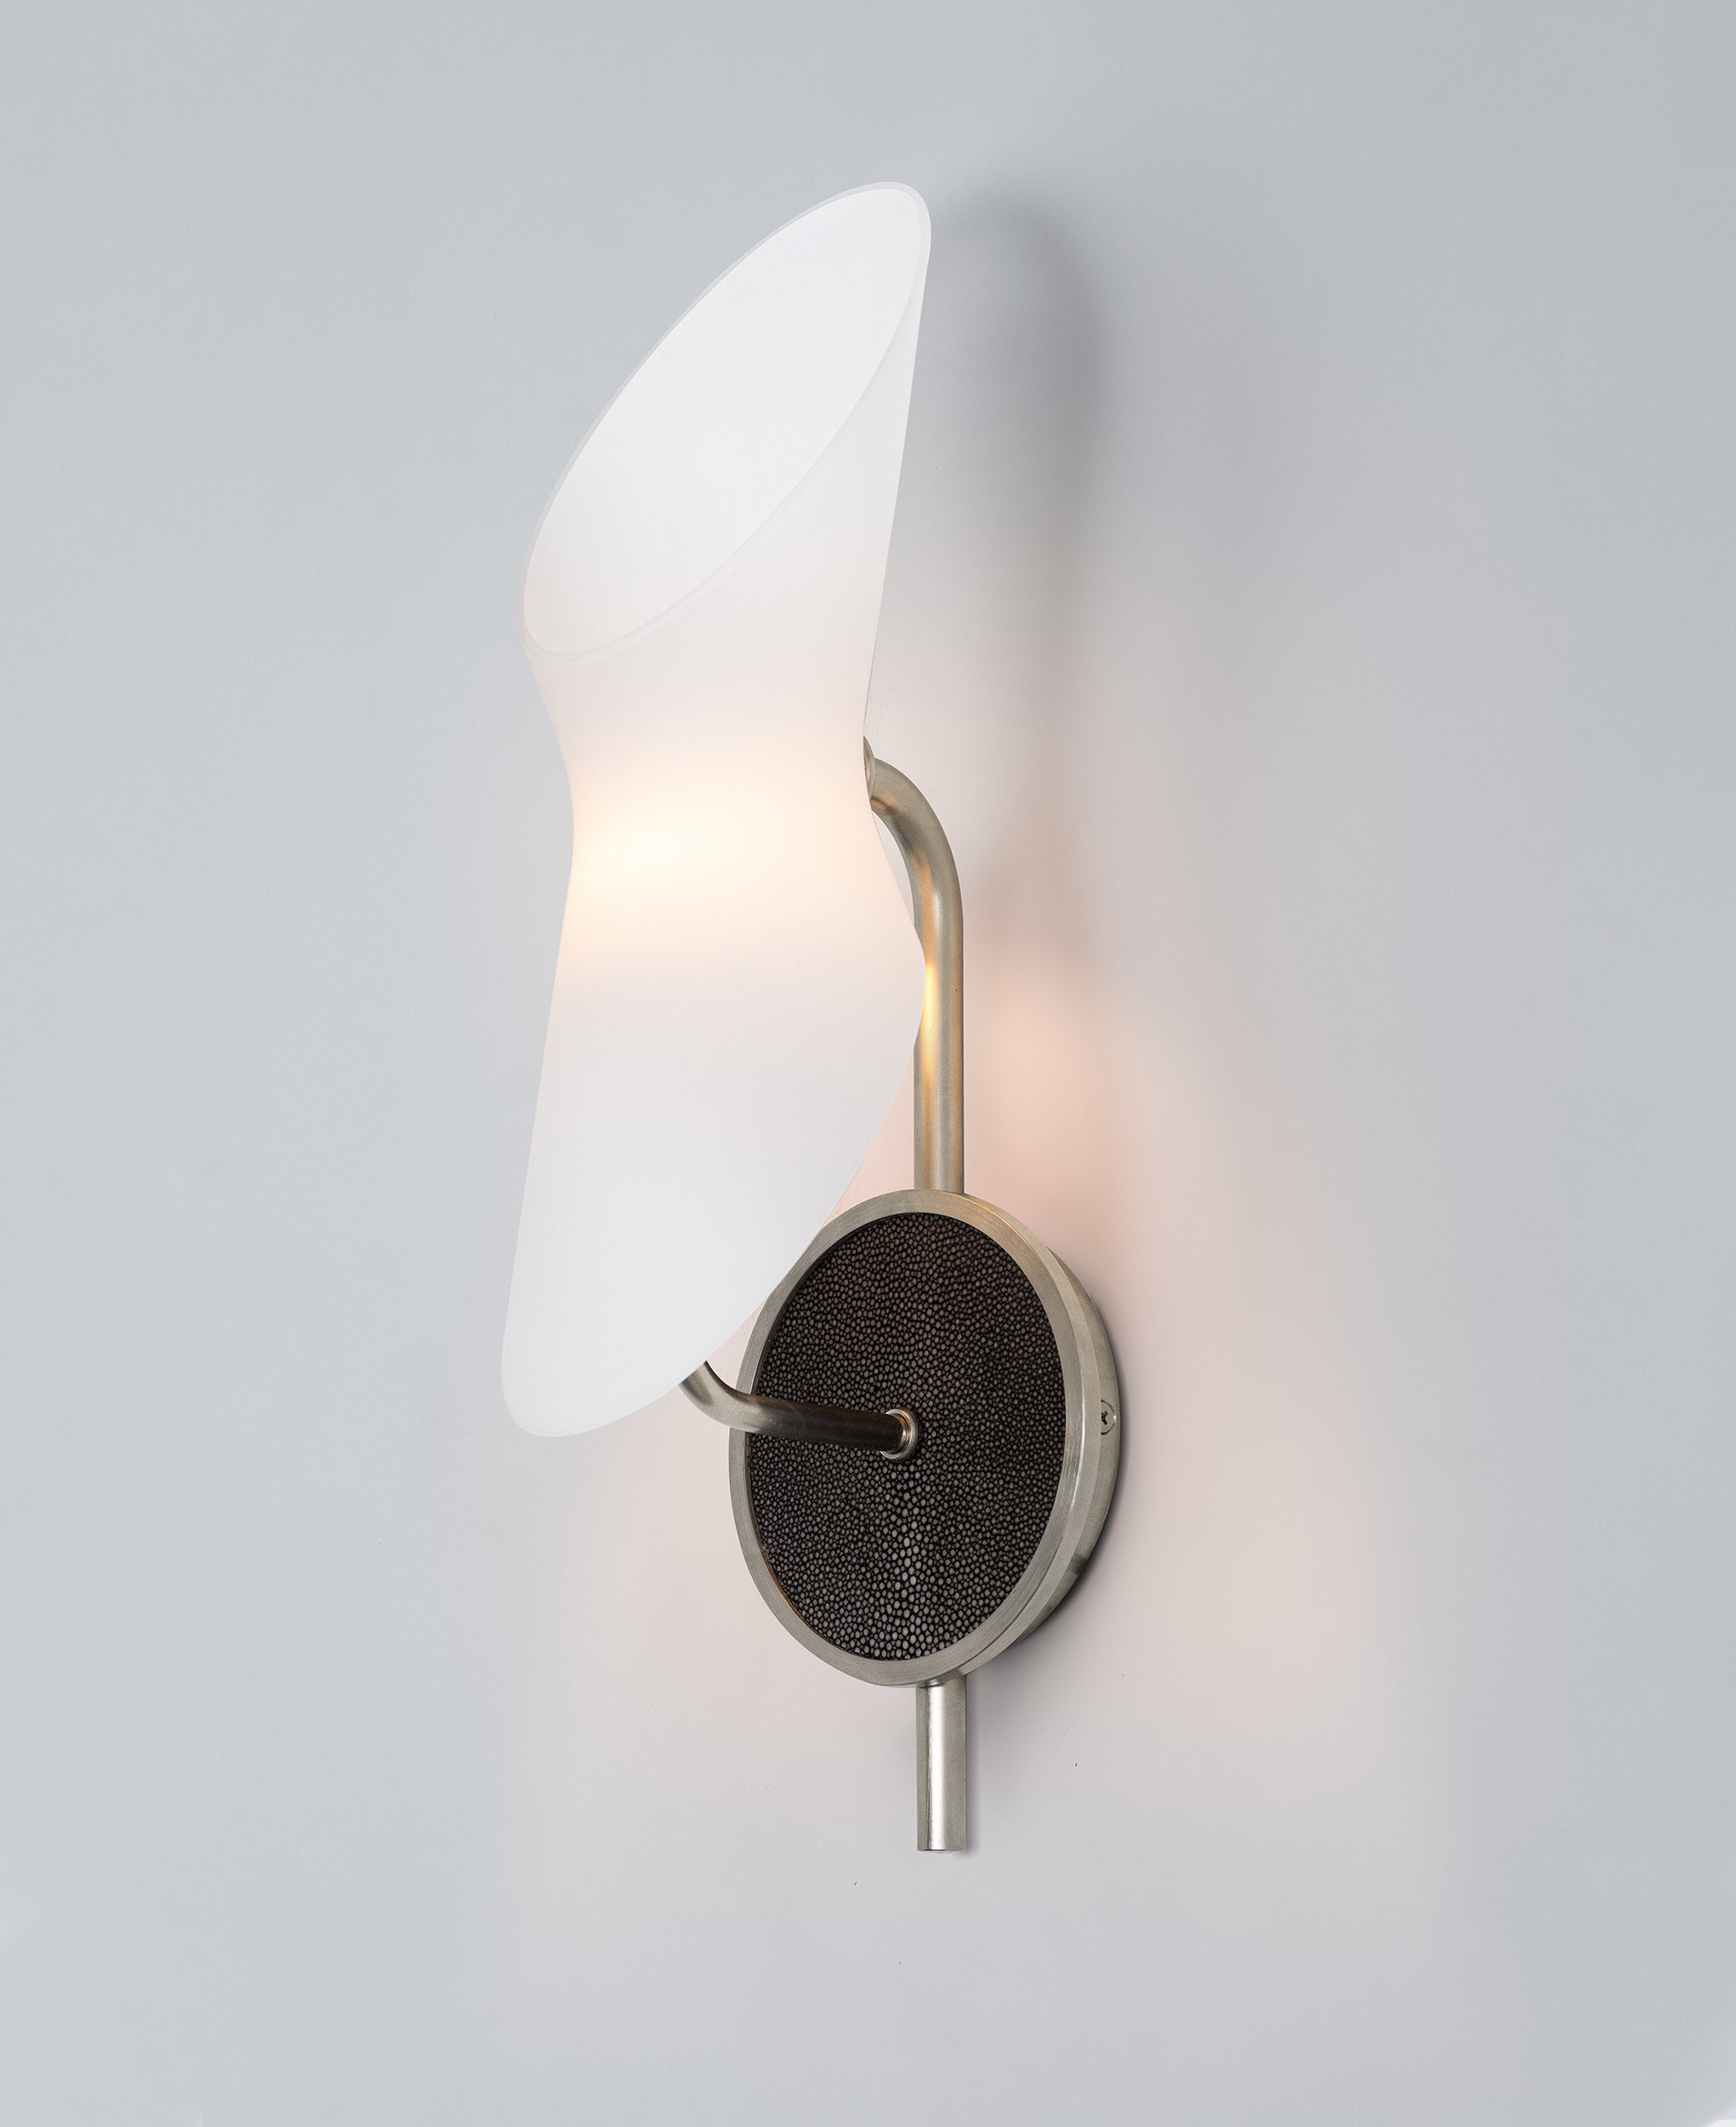 Satin Nickel with Shagreen backplate and White Glass shade